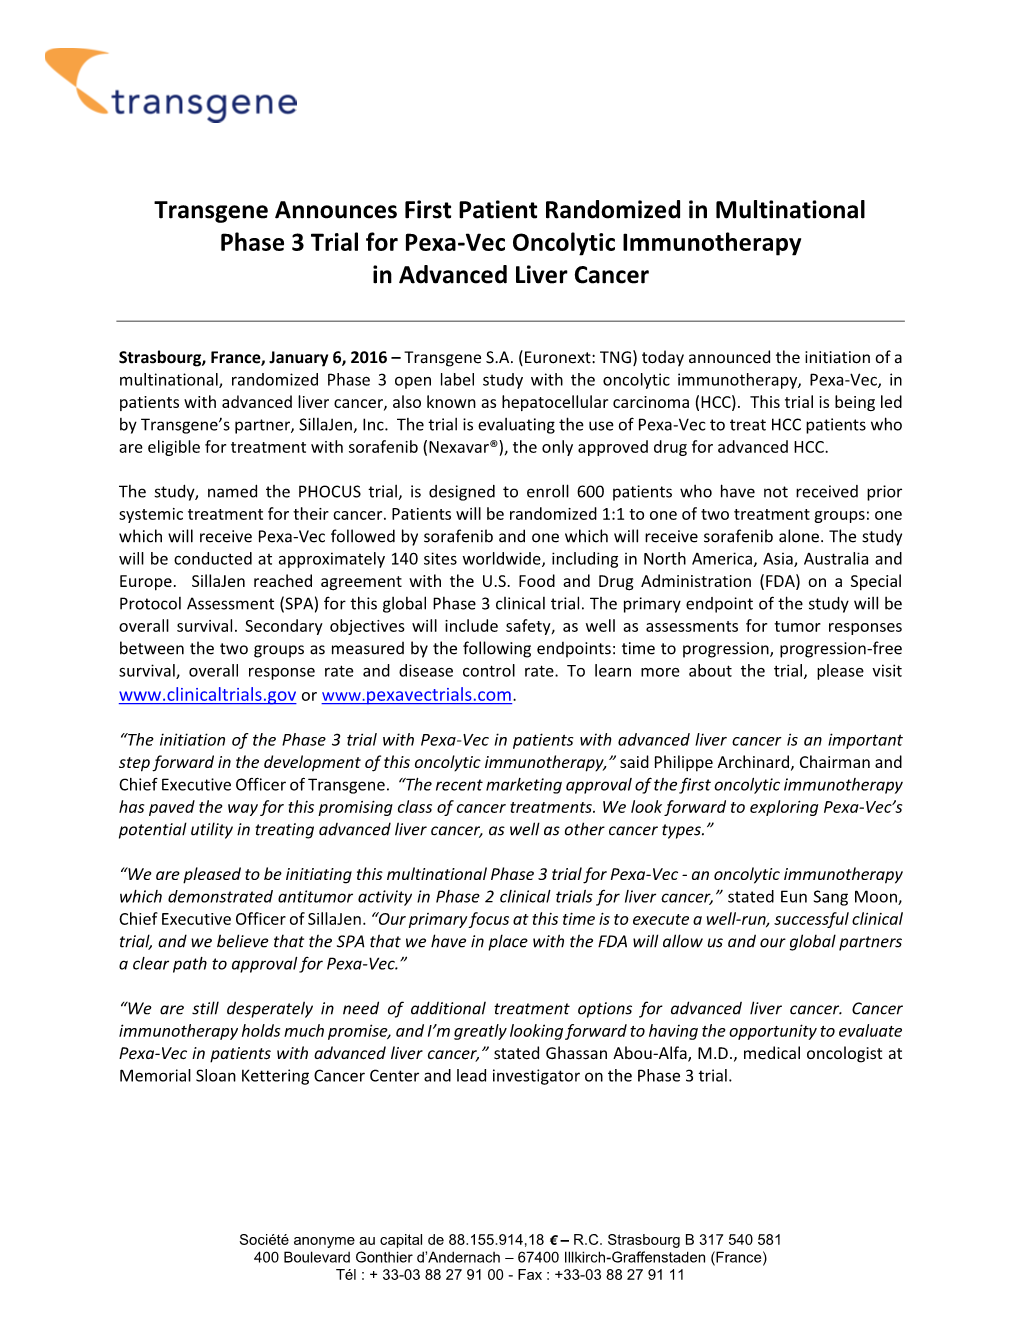 Transgene Announces First Patient Randomized in Multinational Phase 3 Trial for Pexa-Vec Oncolytic Immunotherapy in Advanced Liver Cancer